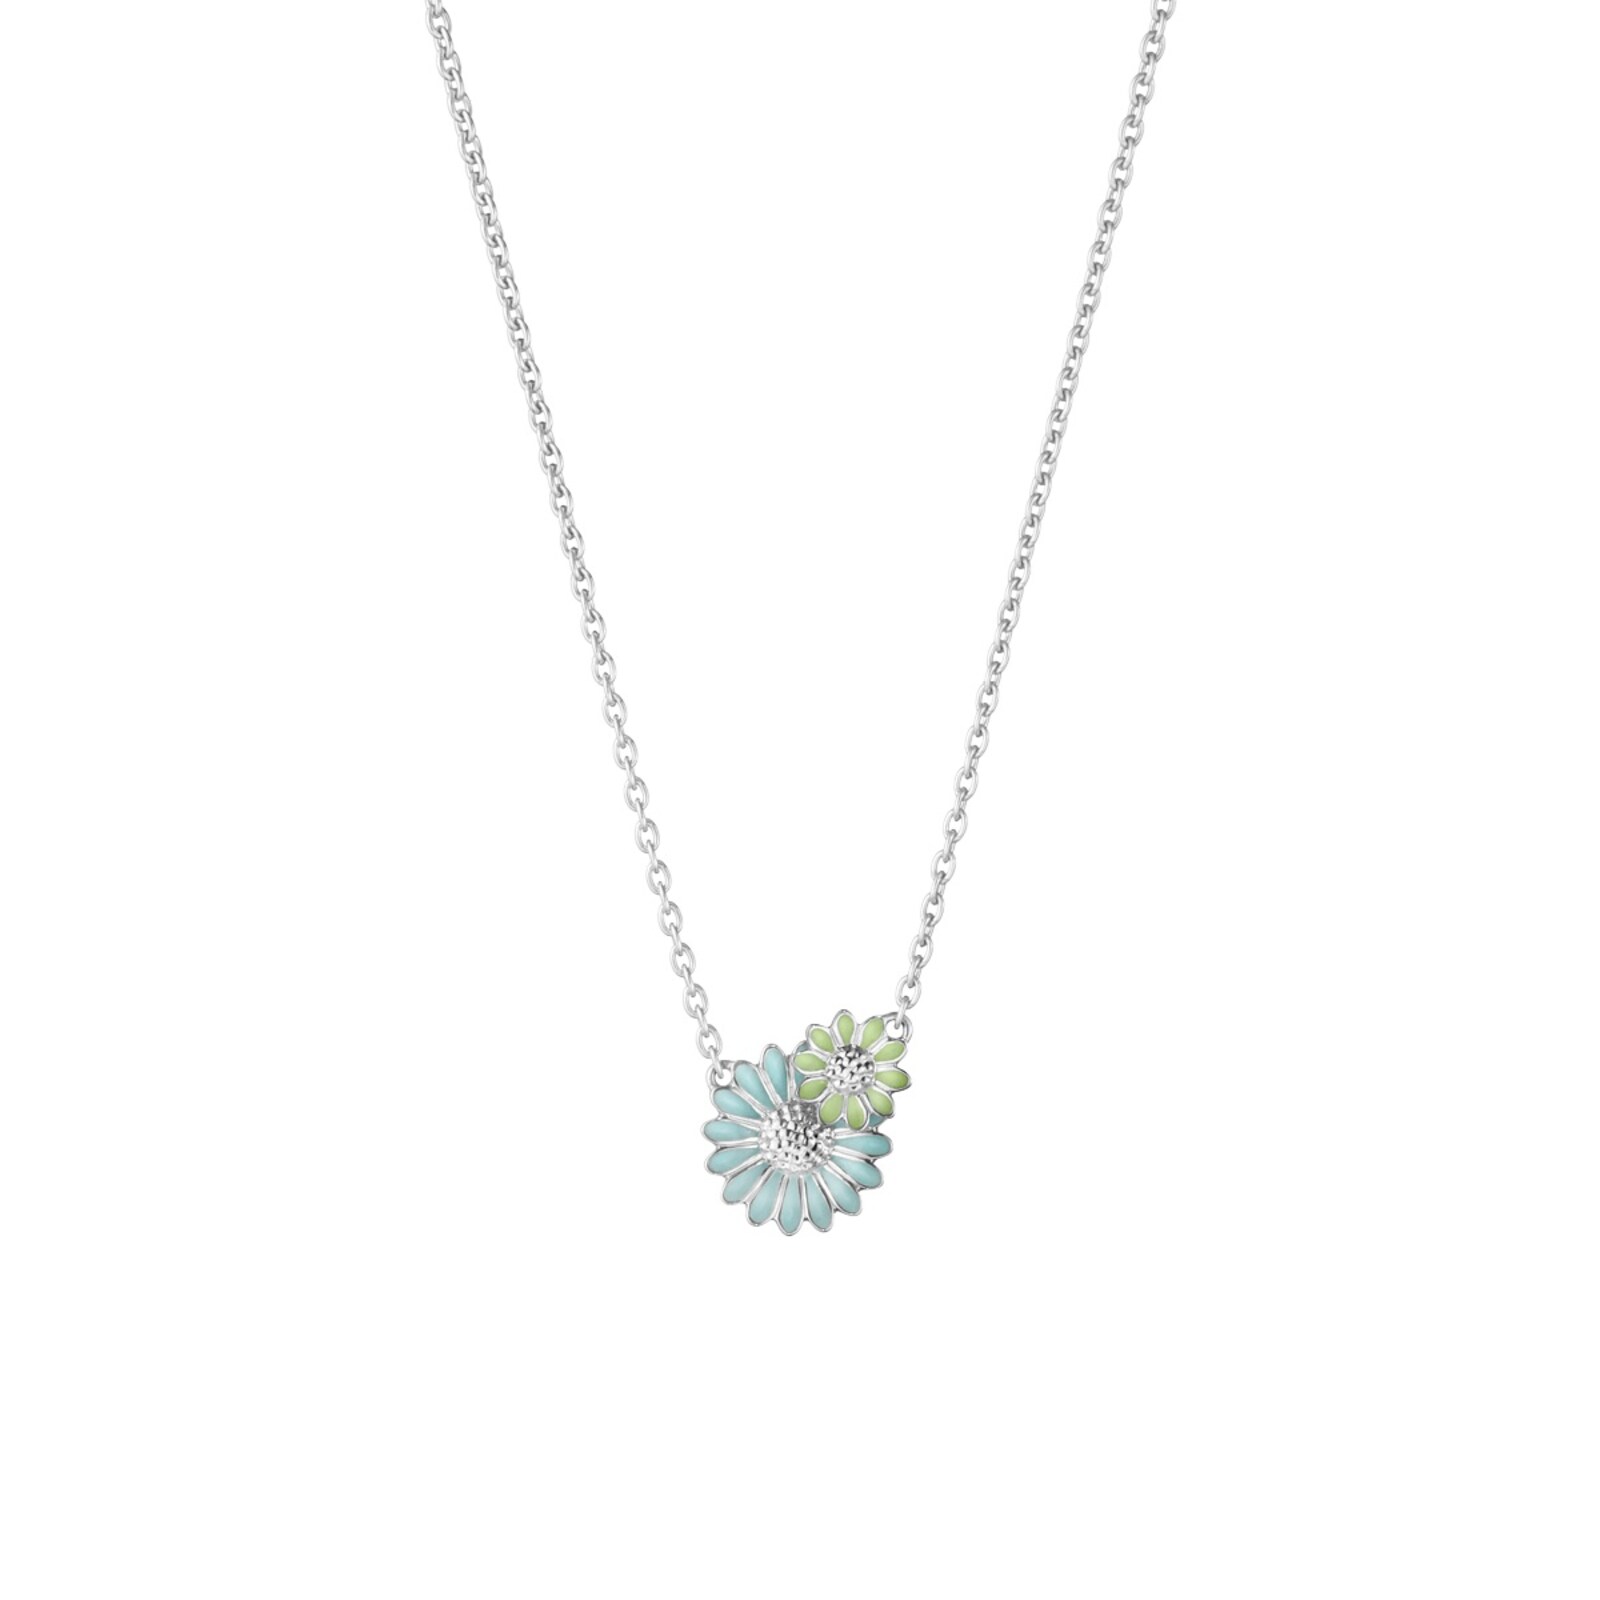 green and blue enamel daisy necklace in rhodium plated silver